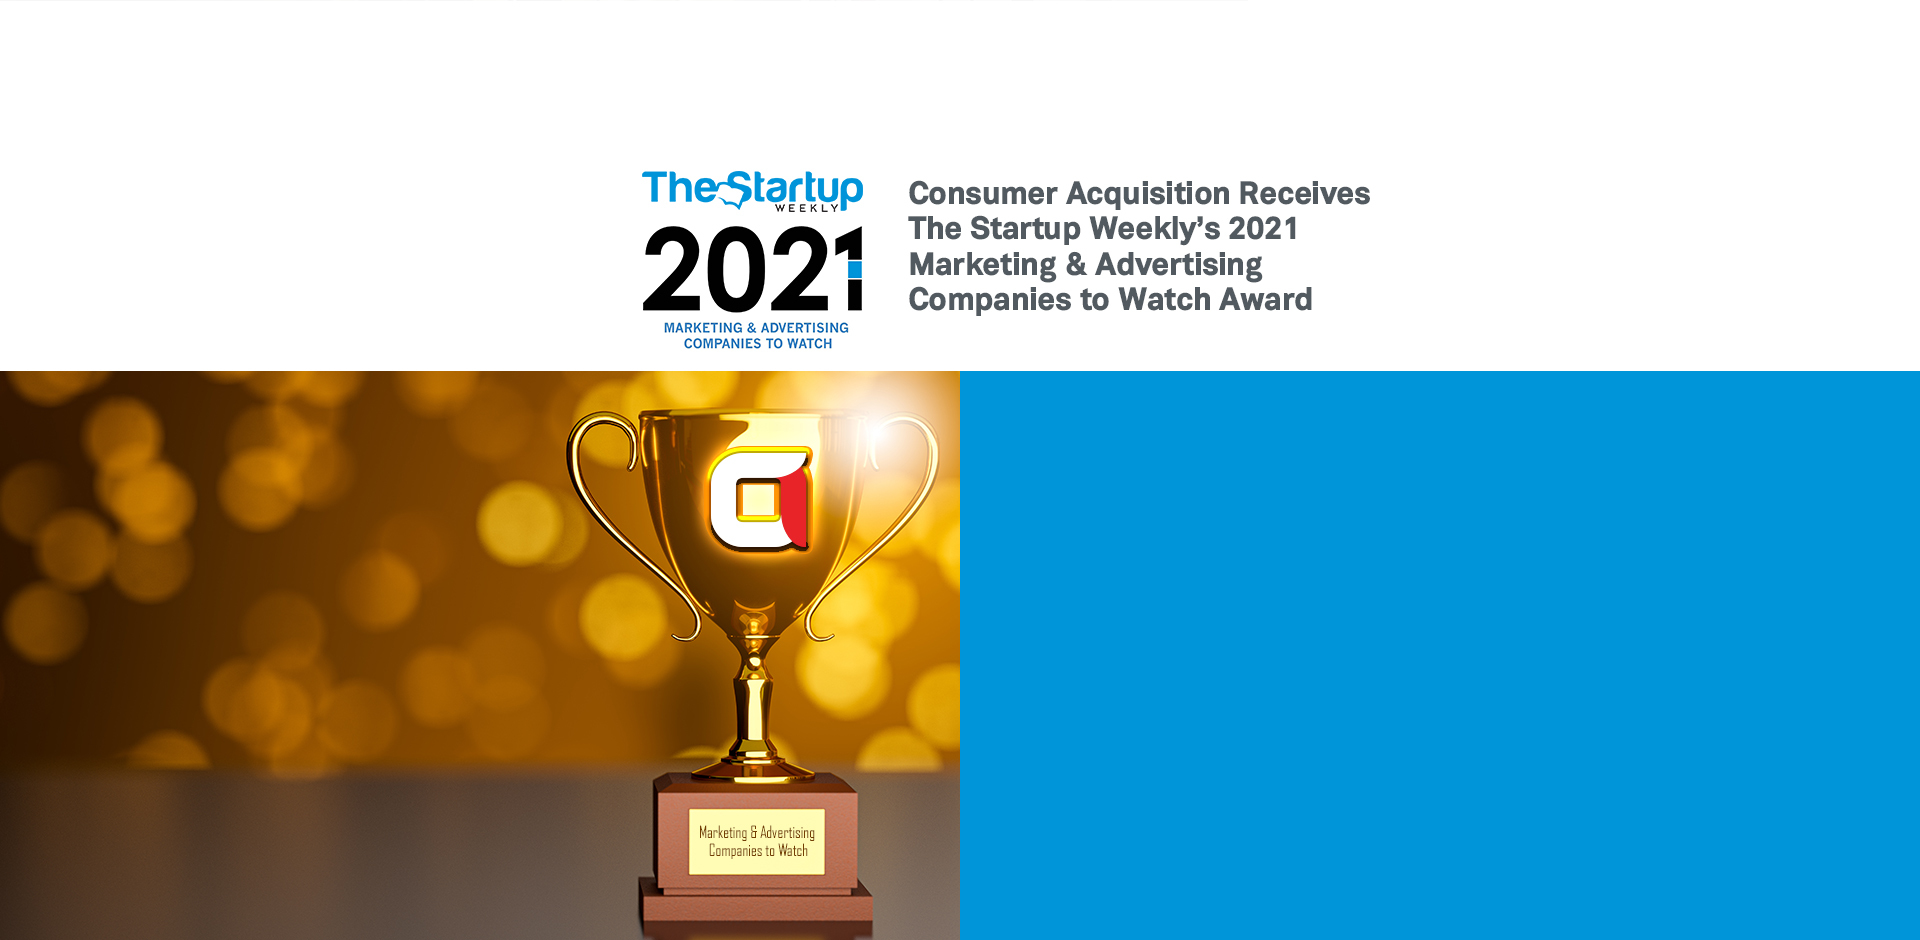 Consumer Acquisition Receives The Startup Weekly’s 2021 Marketing & Advertising Companies to Watch Award